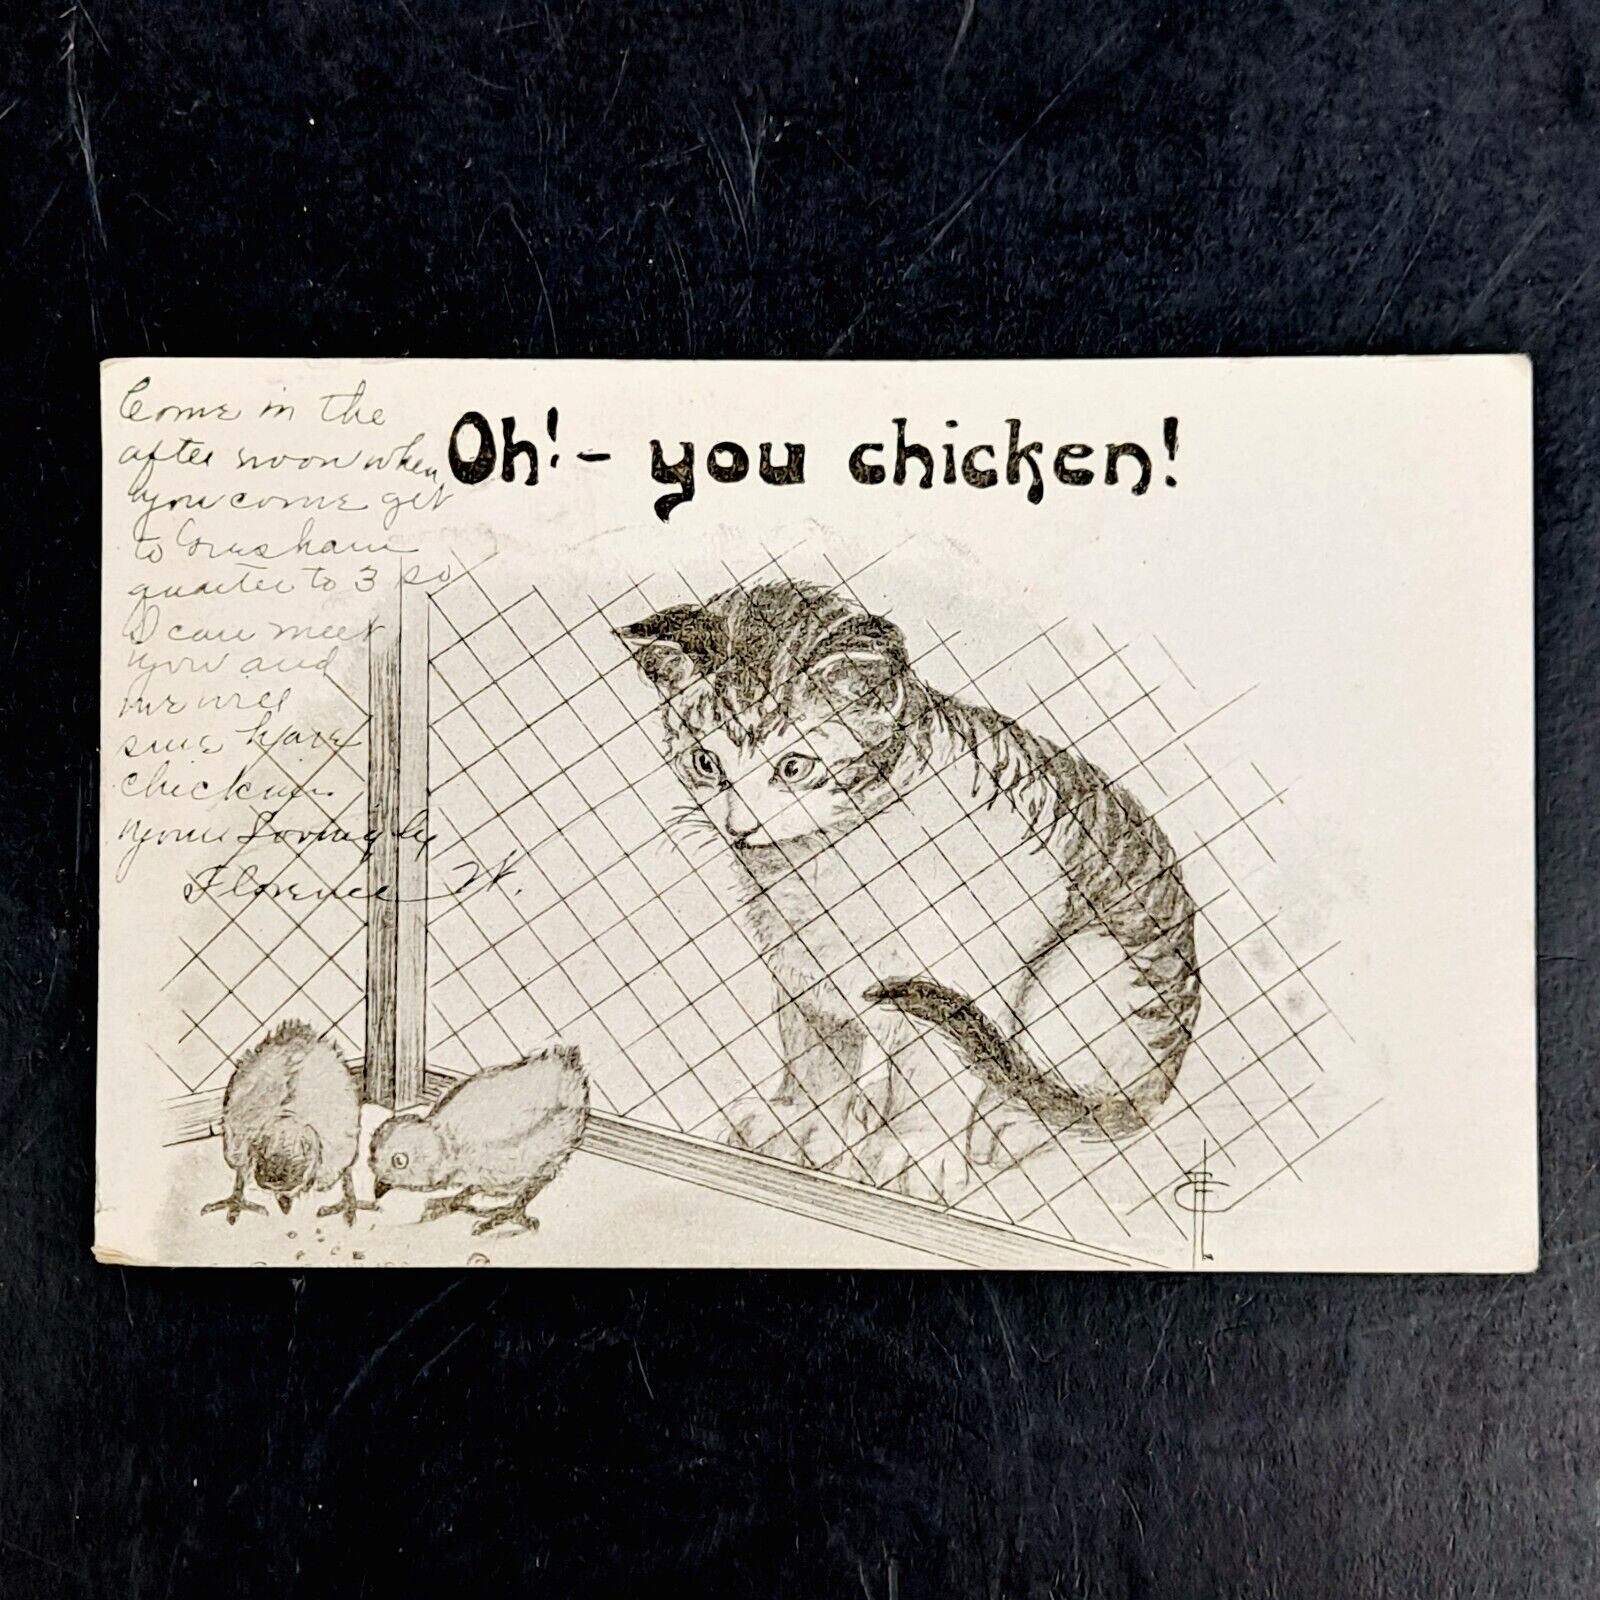 ANTIQUE 1911 FRED CAVALLY POST CARD KITTEN CHICKS OH - YOU CHICKEN POSTCARD